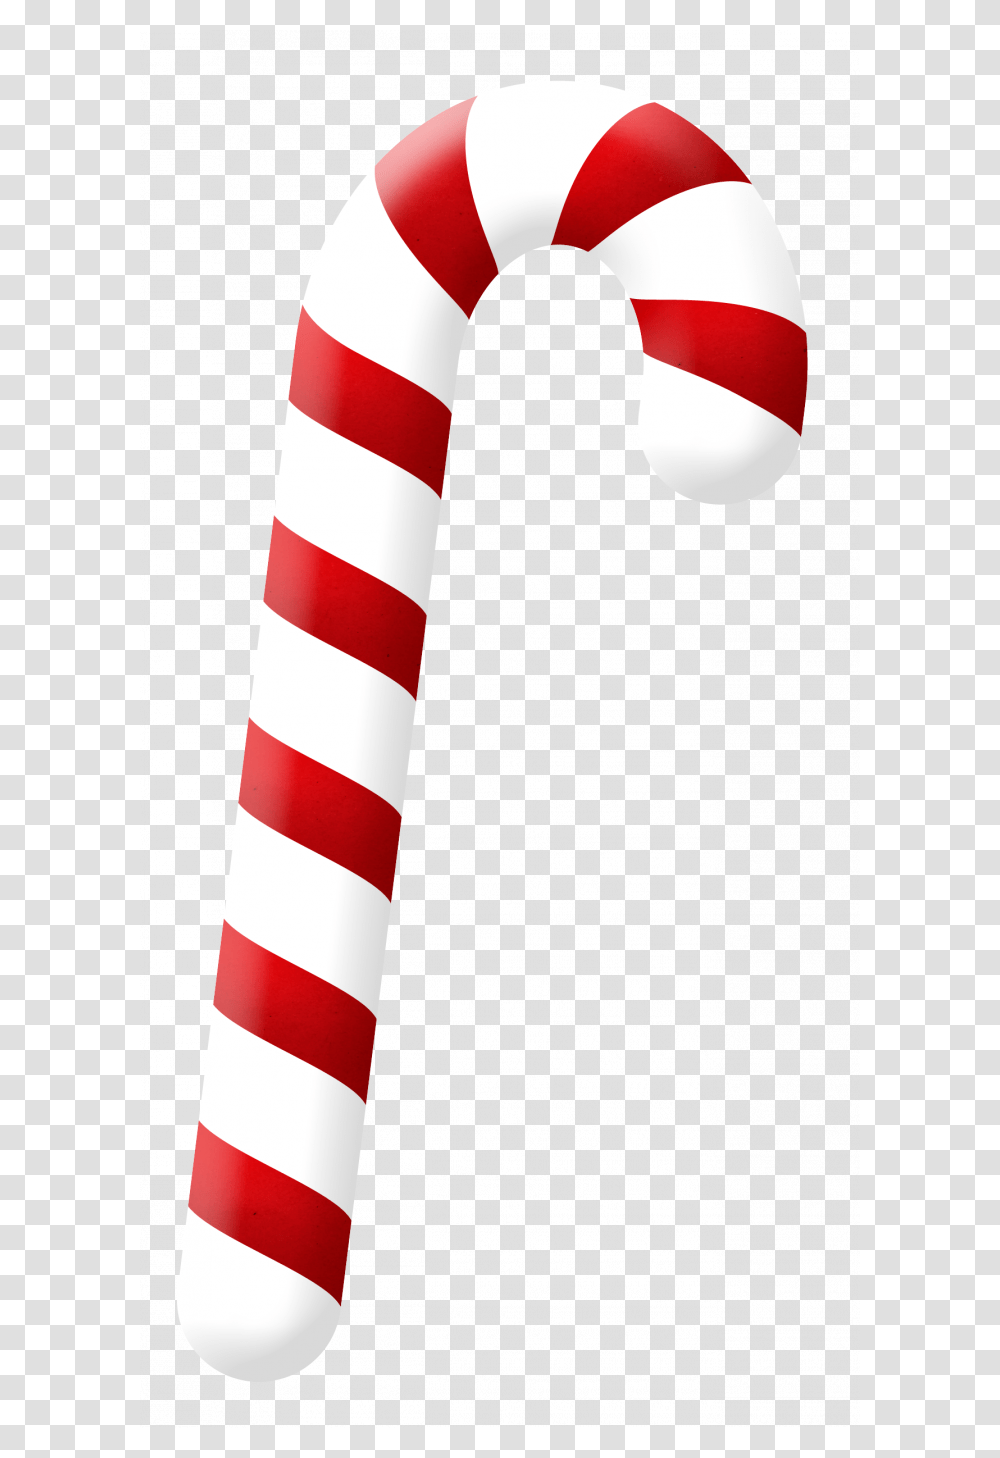 Christmas Grinch Hat Christmas Hat With Name Christmas Cartoon Candy Cane, Fence, Cylinder Transparent Png